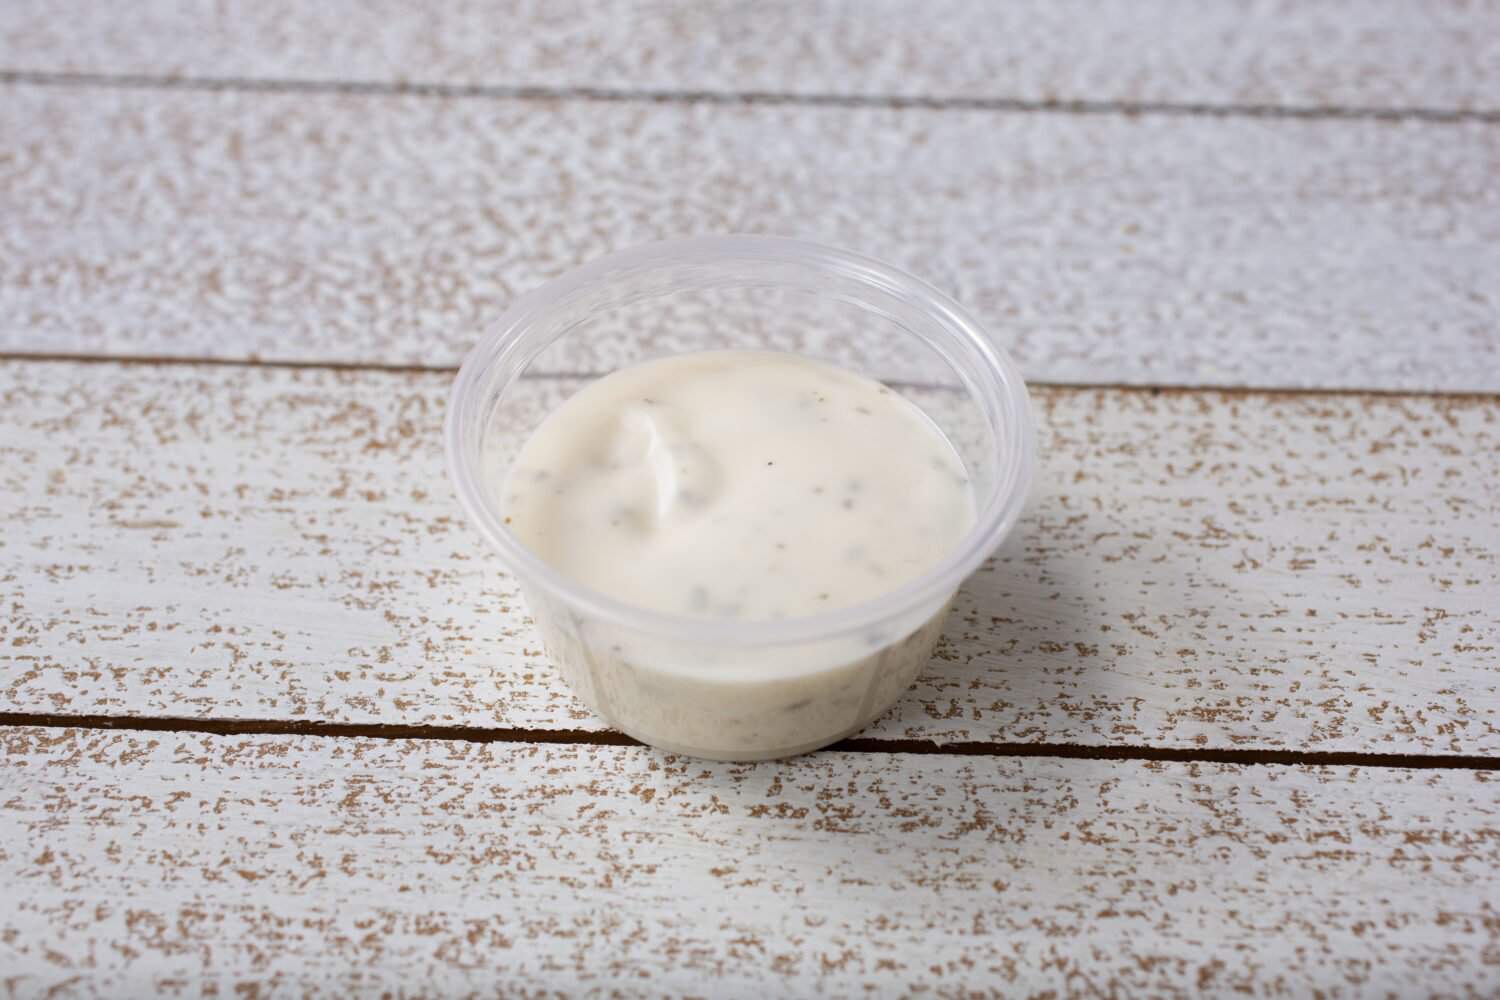 A view of ranch dressing in a small plastic condiment cup.